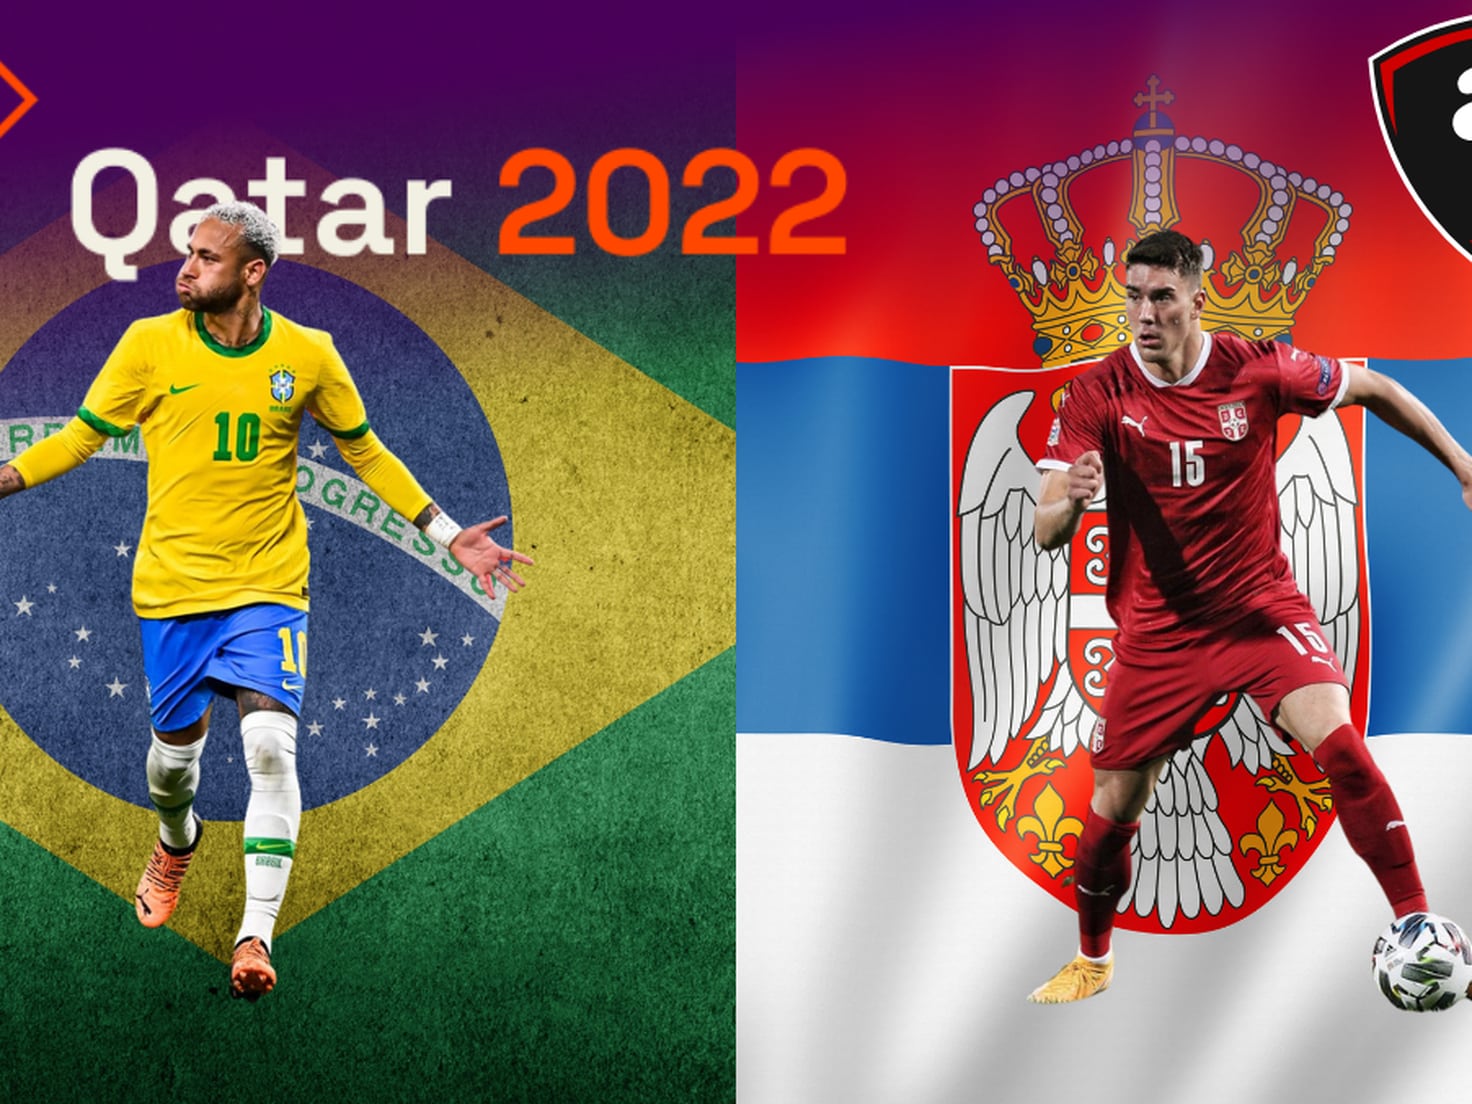 Portugal vs Ghana live streaming: FIFA World Cup 2022 schedule for today:  Brazil vs Serbia, Portugal vs Ghana live streaming, match timing - The  Economic Times